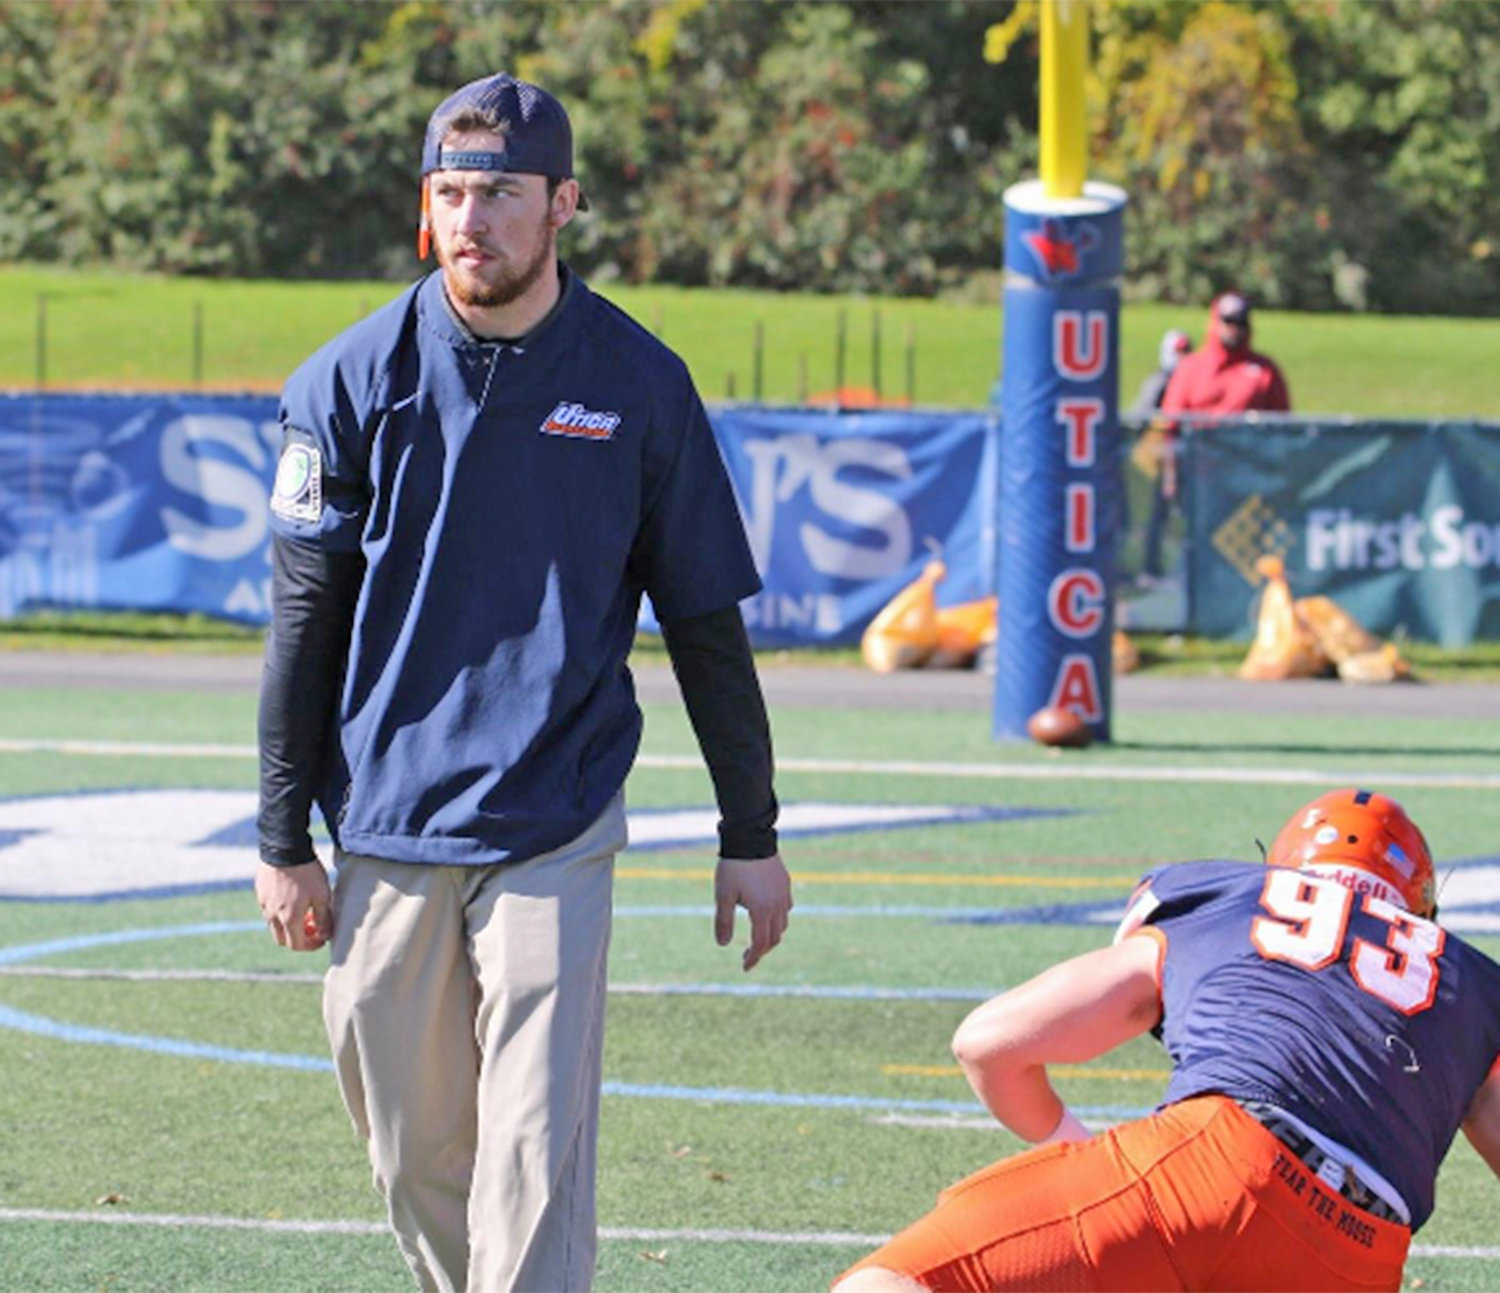 TAKING THE REINS AT ONEIDA — Matt McCoy walks the field at then-Utica College as a defensive coach before a game. McCoy, a Vernon-Verona-Sherrill graduate and former UC defensive back, has been chosen as the new varsity head football coach at Oneida.